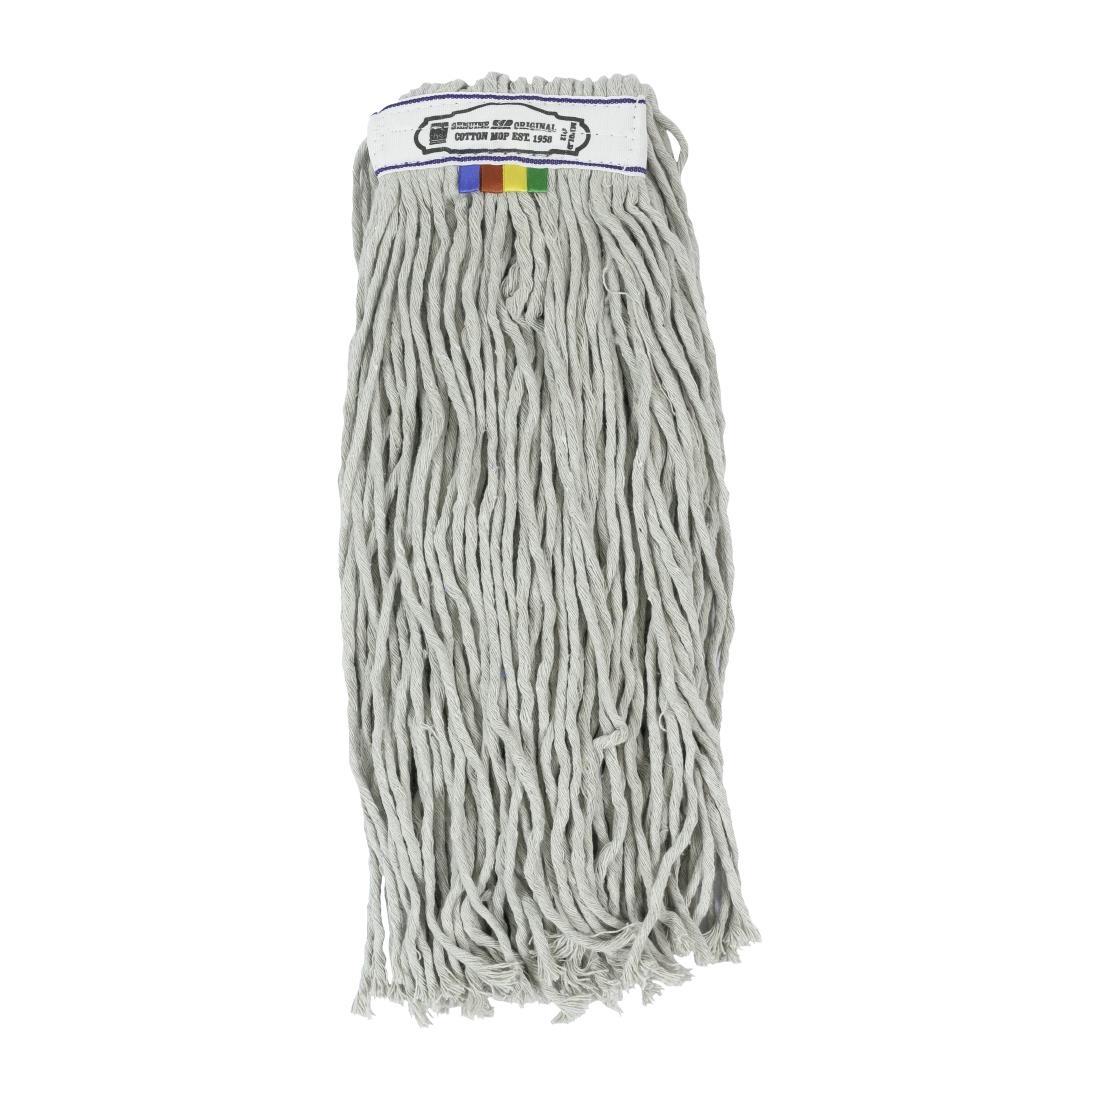 SYR Traditional Multifold Cotton Kentucky Mop Head 16oz - FT391  - 1